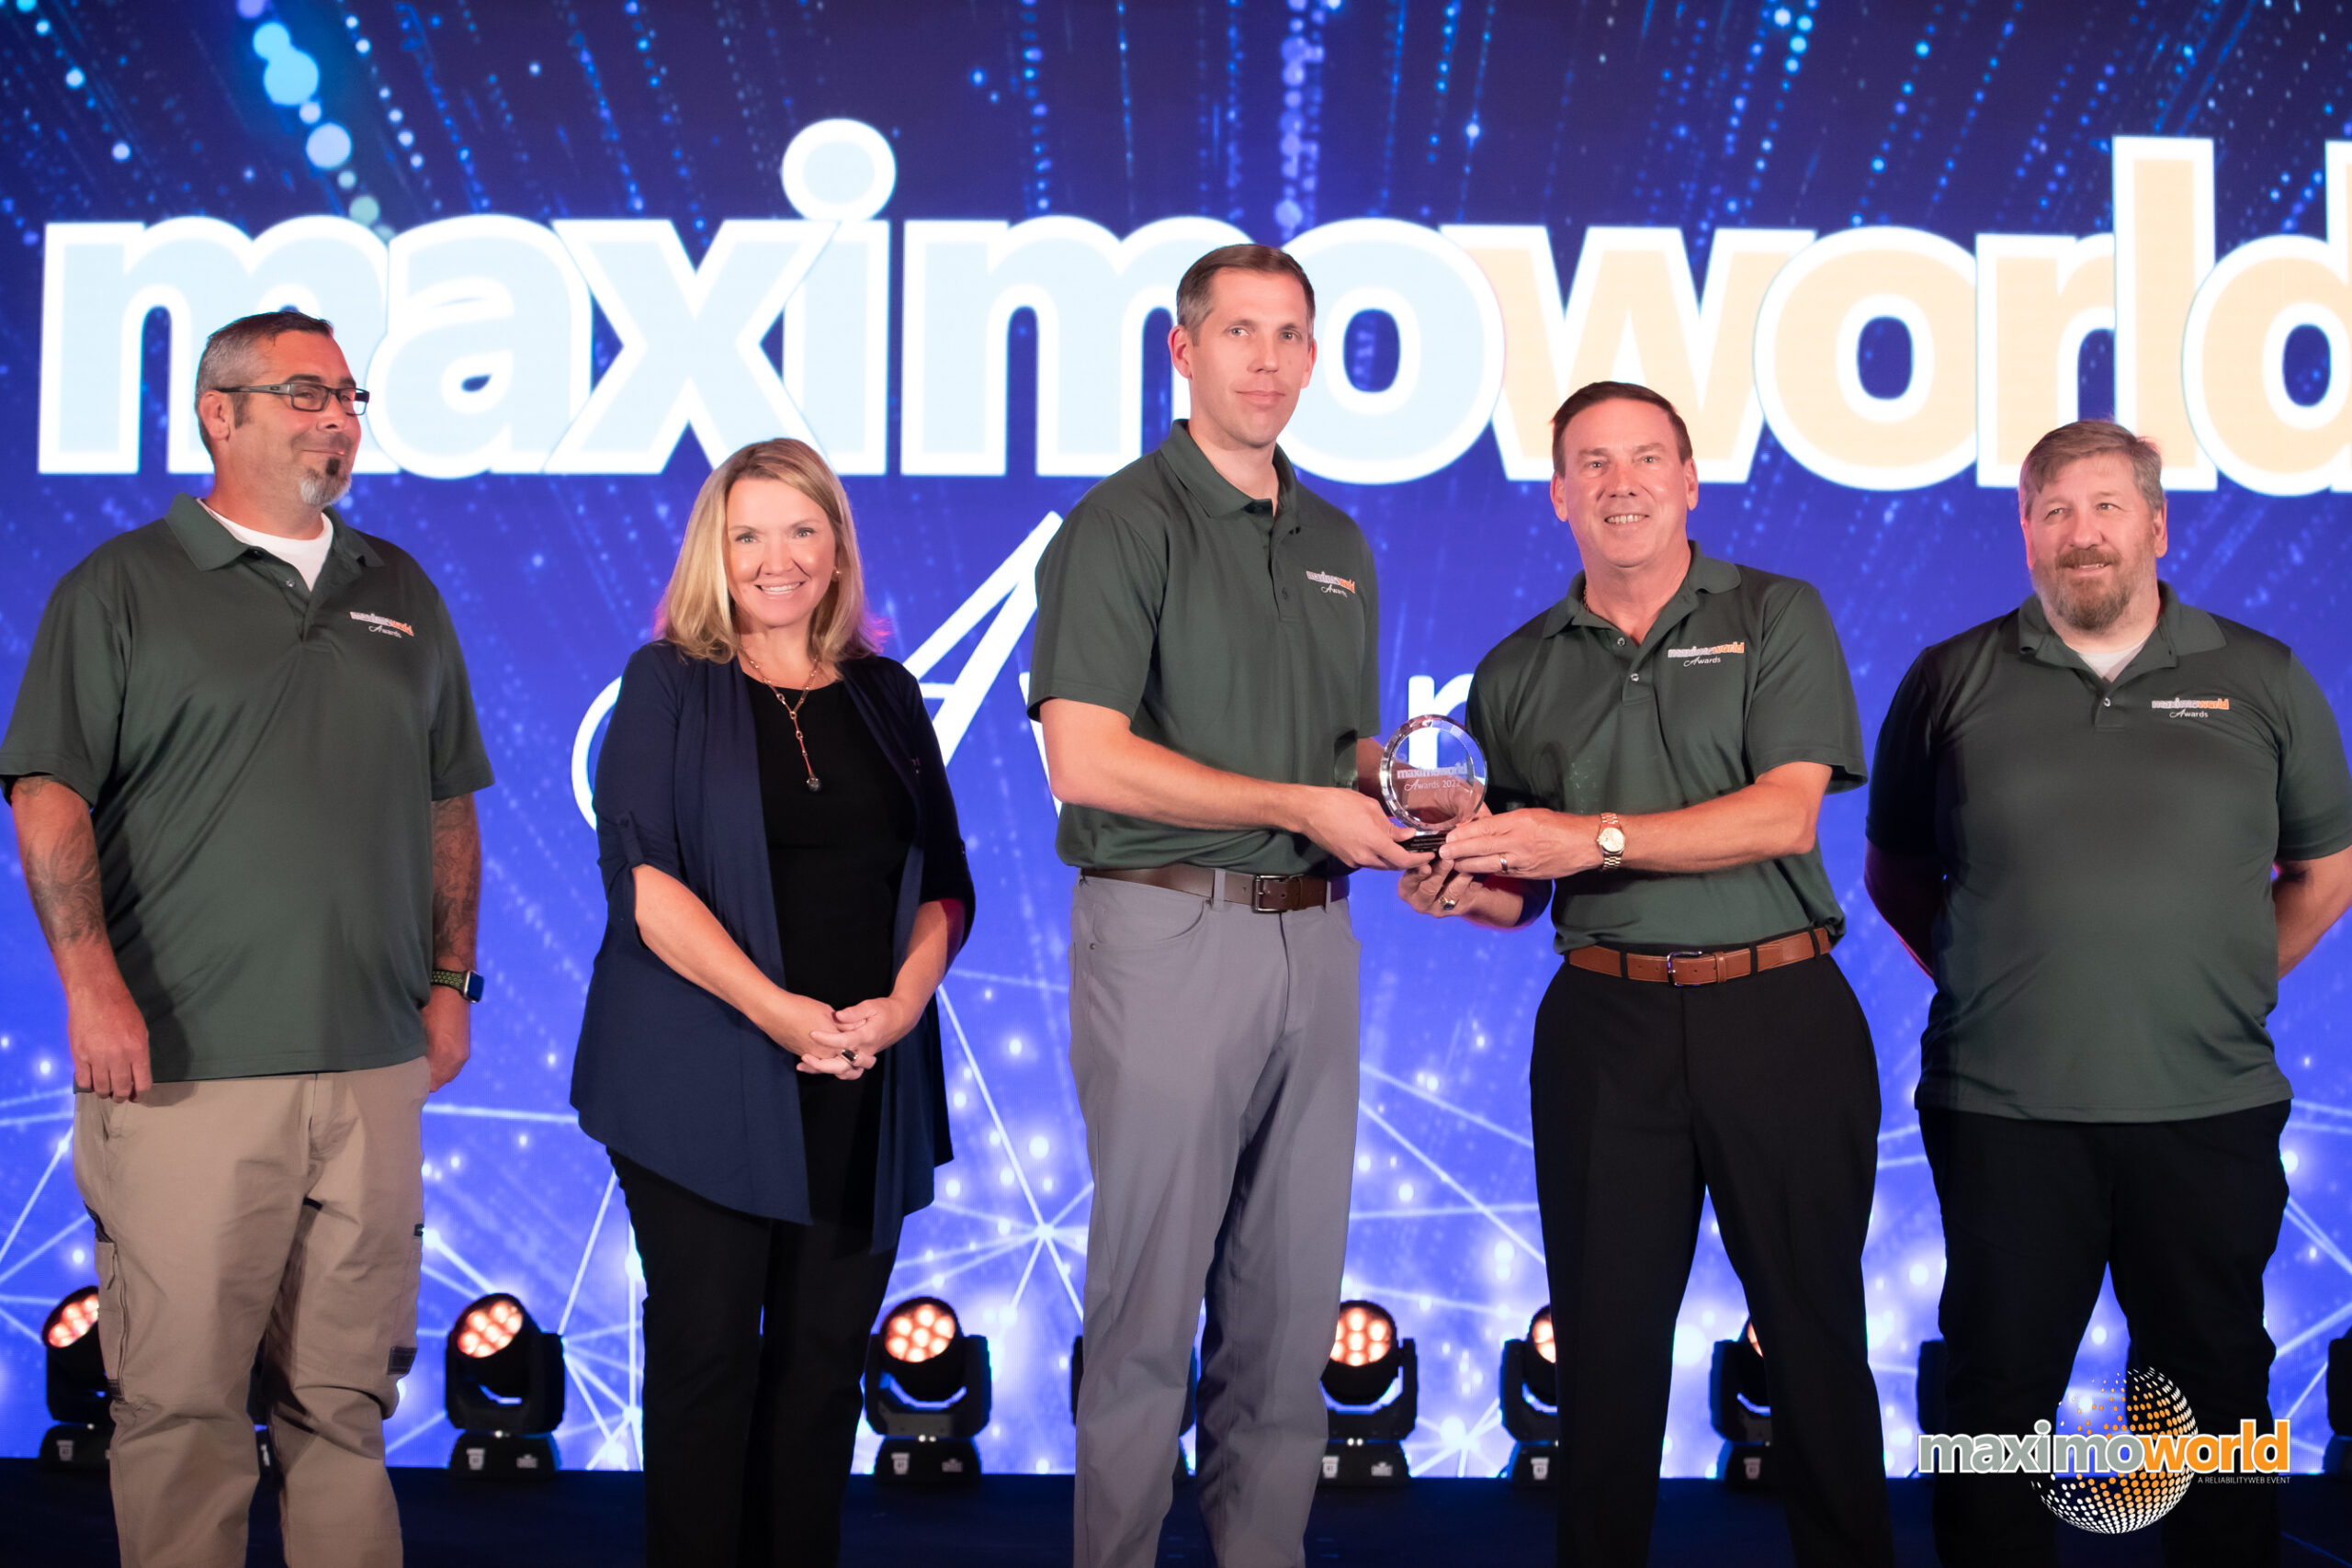 CGS Awarded Best New Implementation at 2022 MaximoWorld Conference